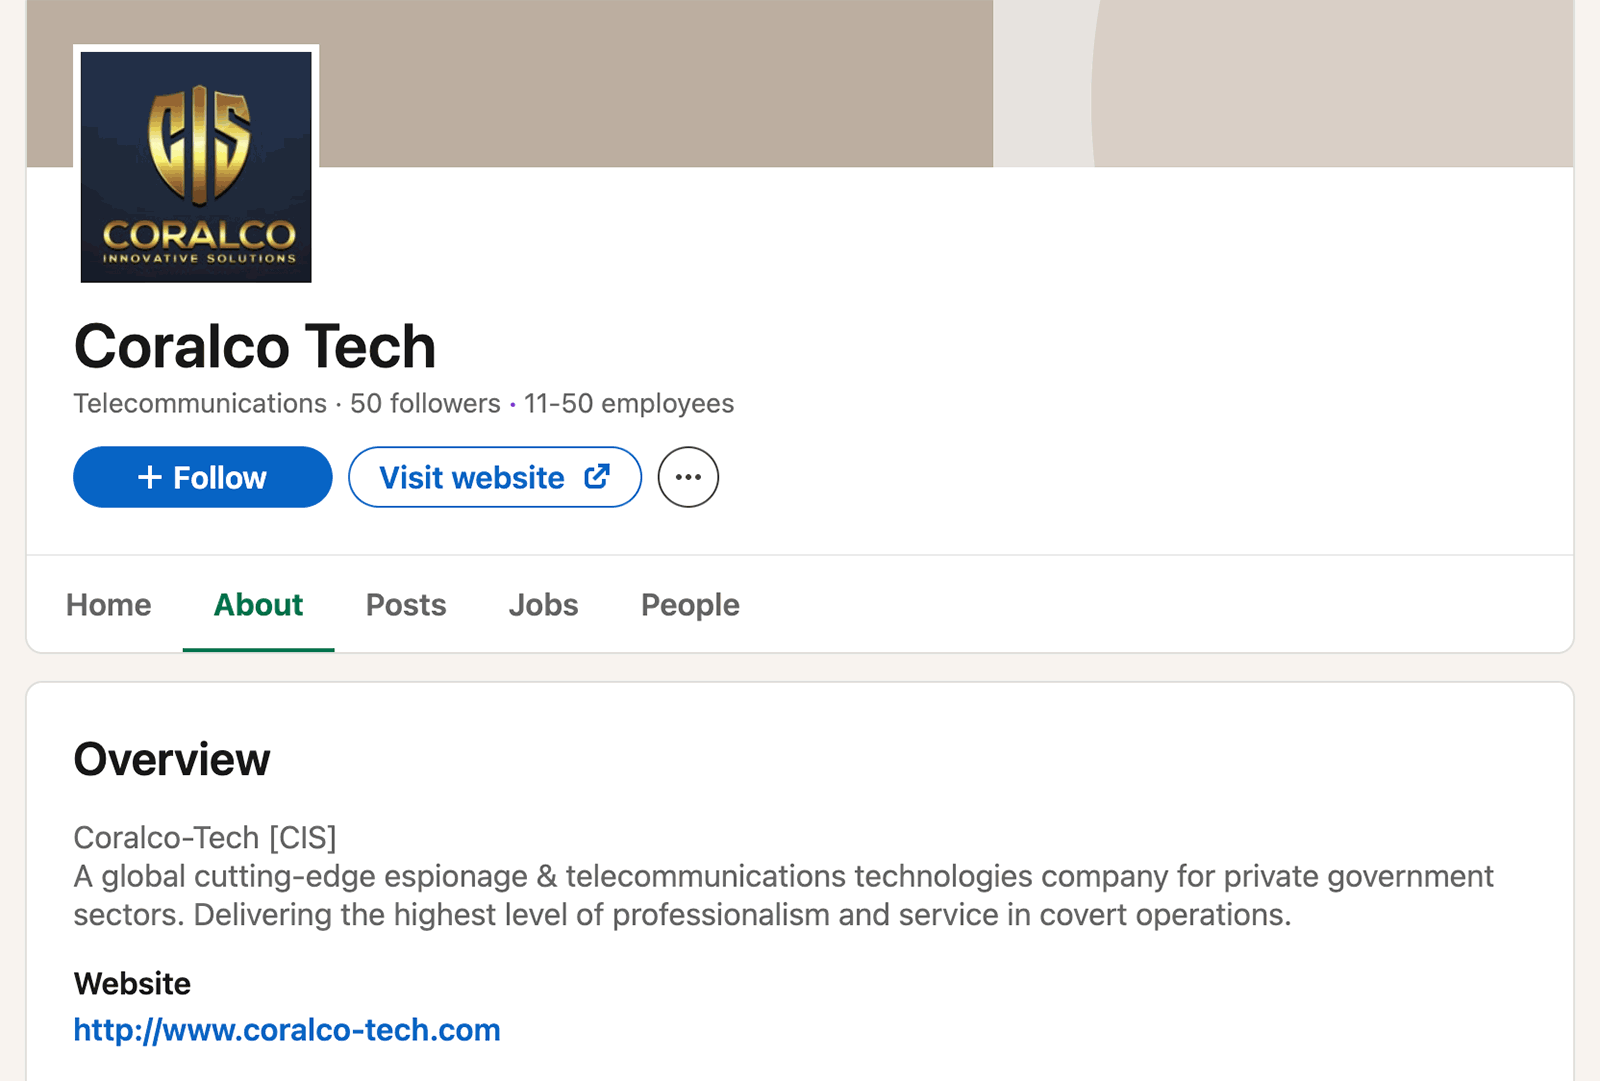 LinkedIn-side for Coralco Tech